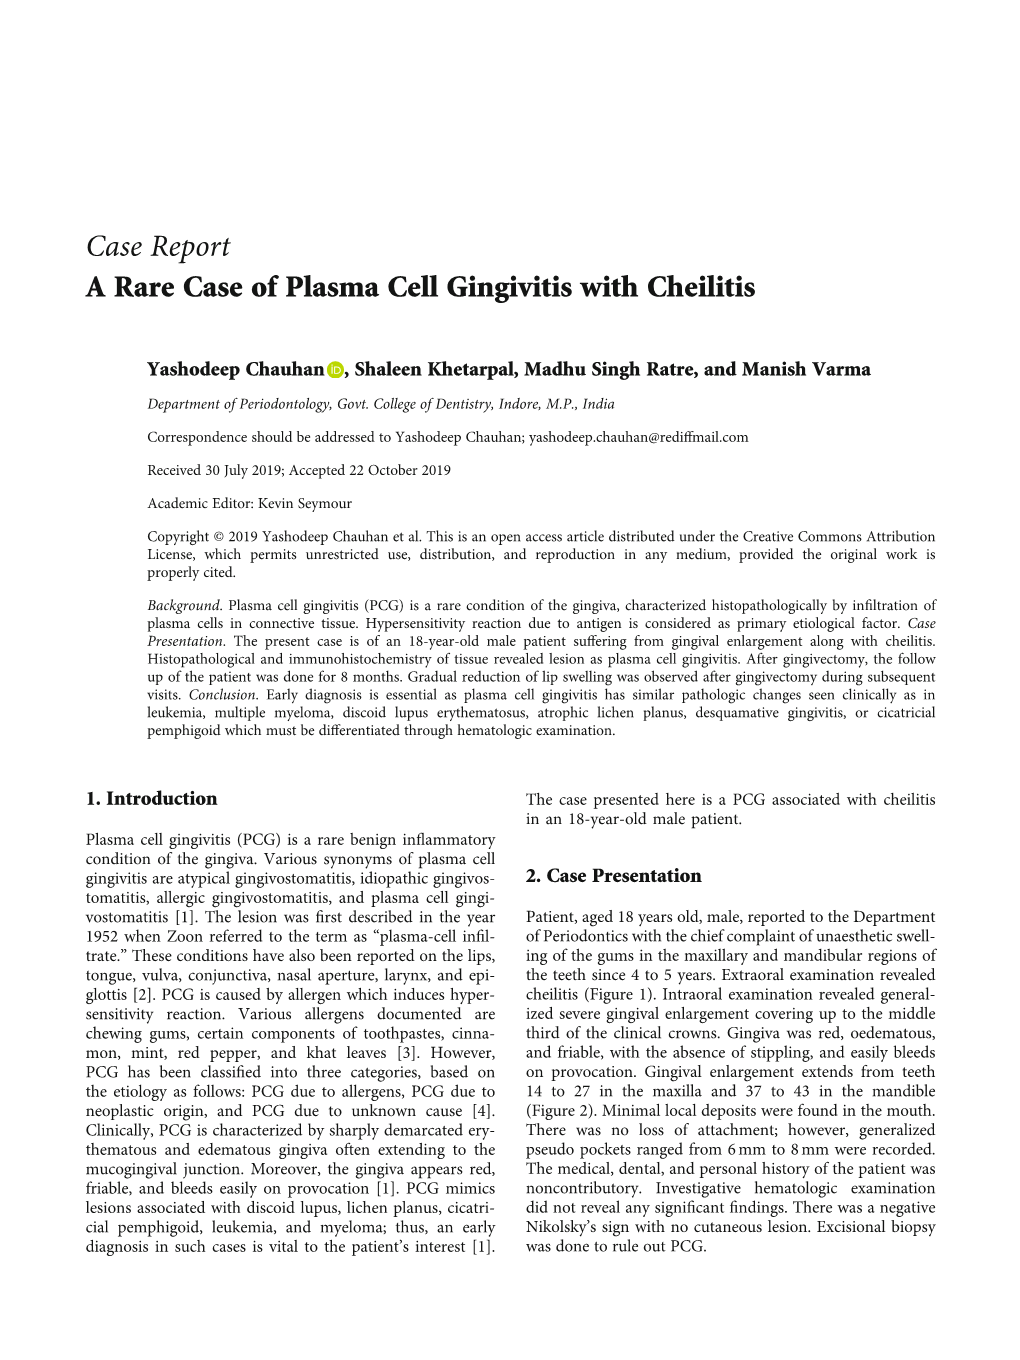 Case Report a Rare Case of Plasma Cell Gingivitis with Cheilitis